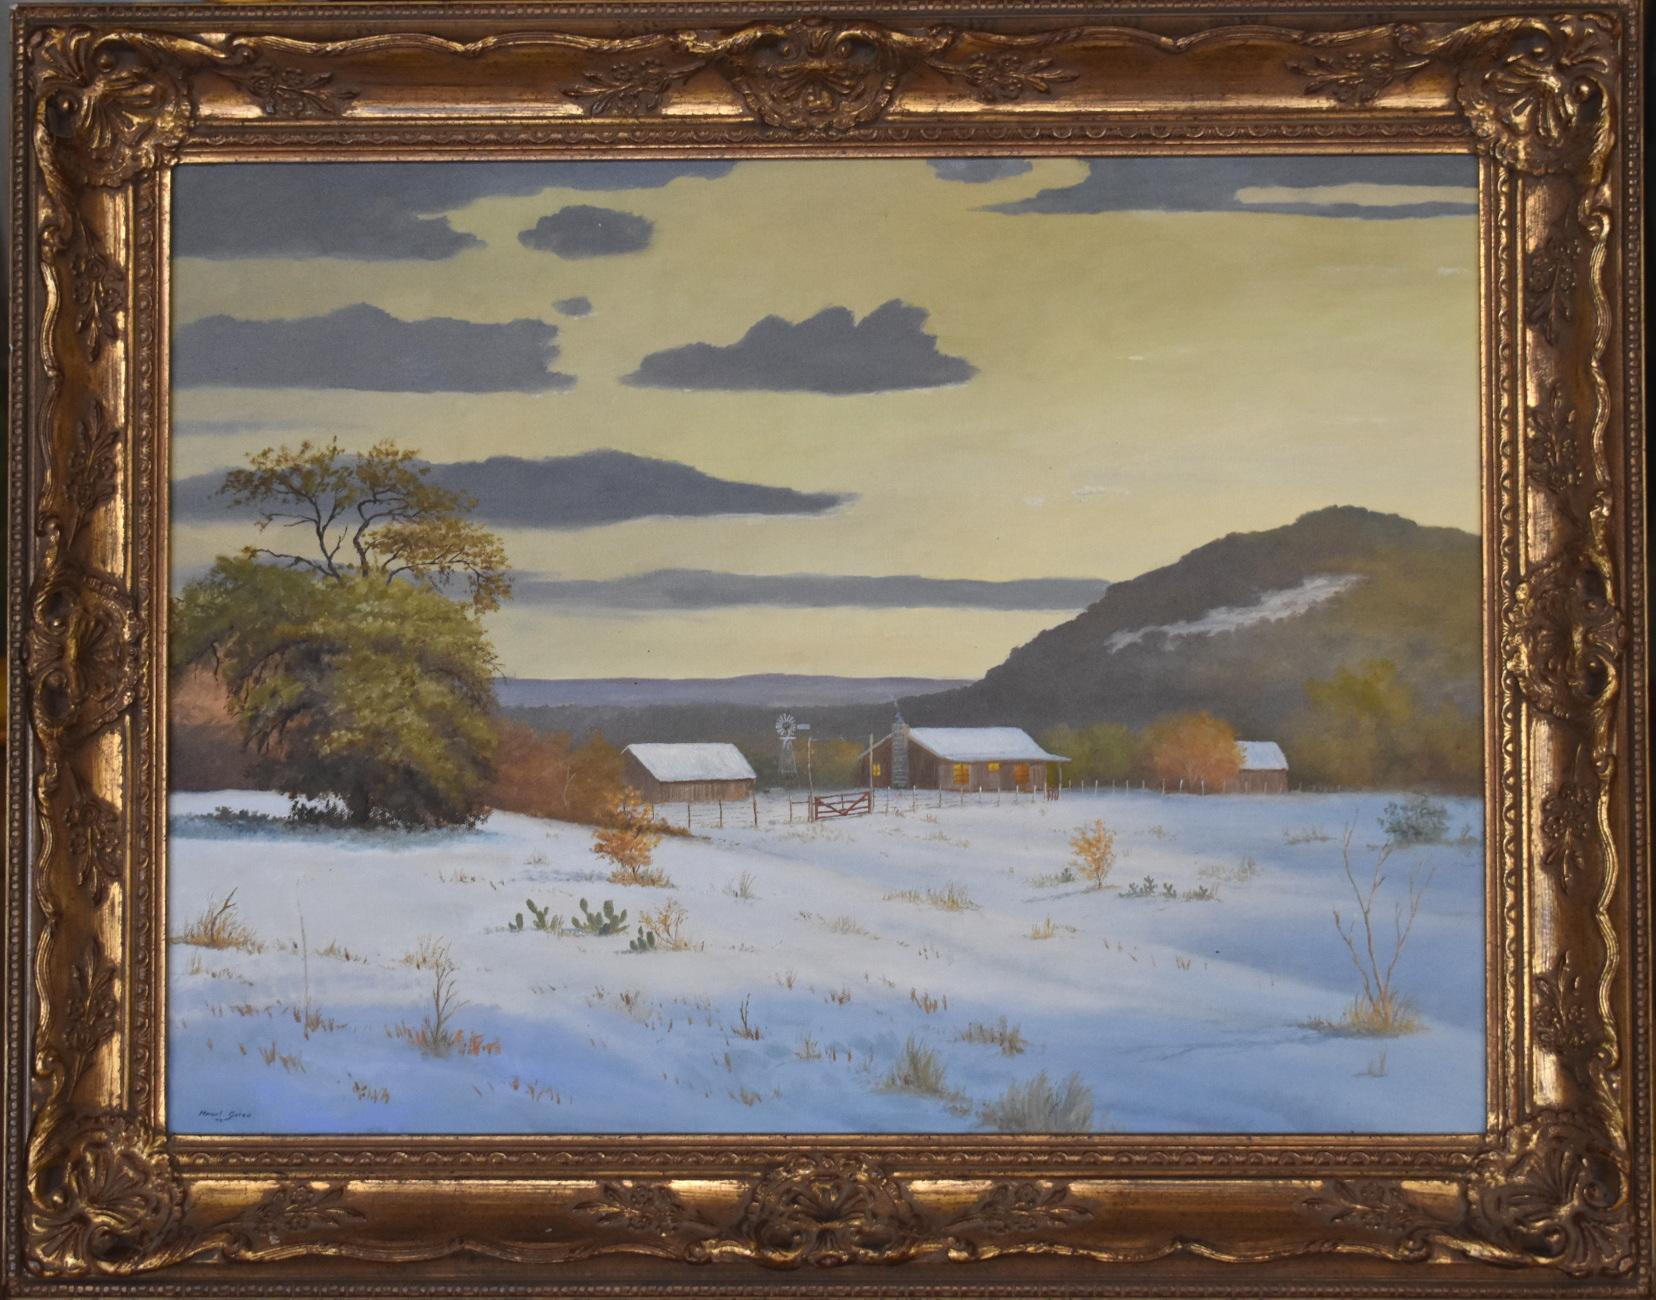 Landscape Painting Manuel Garza - "SUNSET HILL COUNTRY IN WHITE", SNOW SCENE DE LA TEXAS HILL COUNTRY